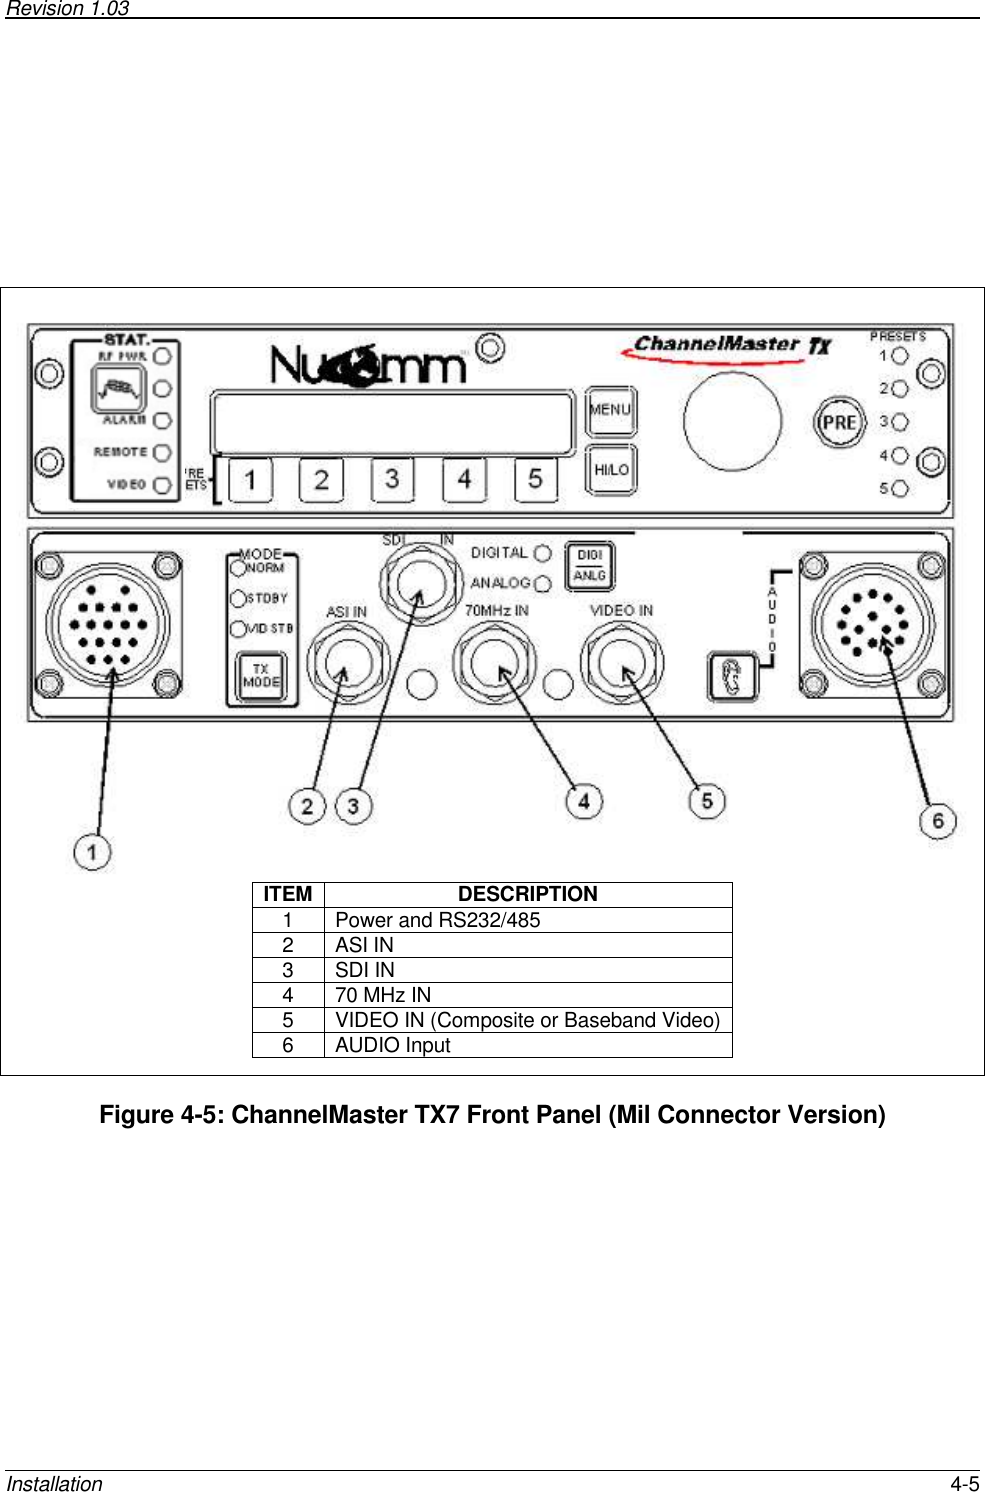 Revision 1.03        Installation  4-5            ITEM DESCRIPTION 1  Power and RS232/485 2  ASI IN 3  SDI IN 4  70 MHz IN 5  VIDEO IN (Composite or Baseband Video)  6  AUDIO Input    Figure 4-5: ChannelMaster TX7 Front Panel (Mil Connector Version) 